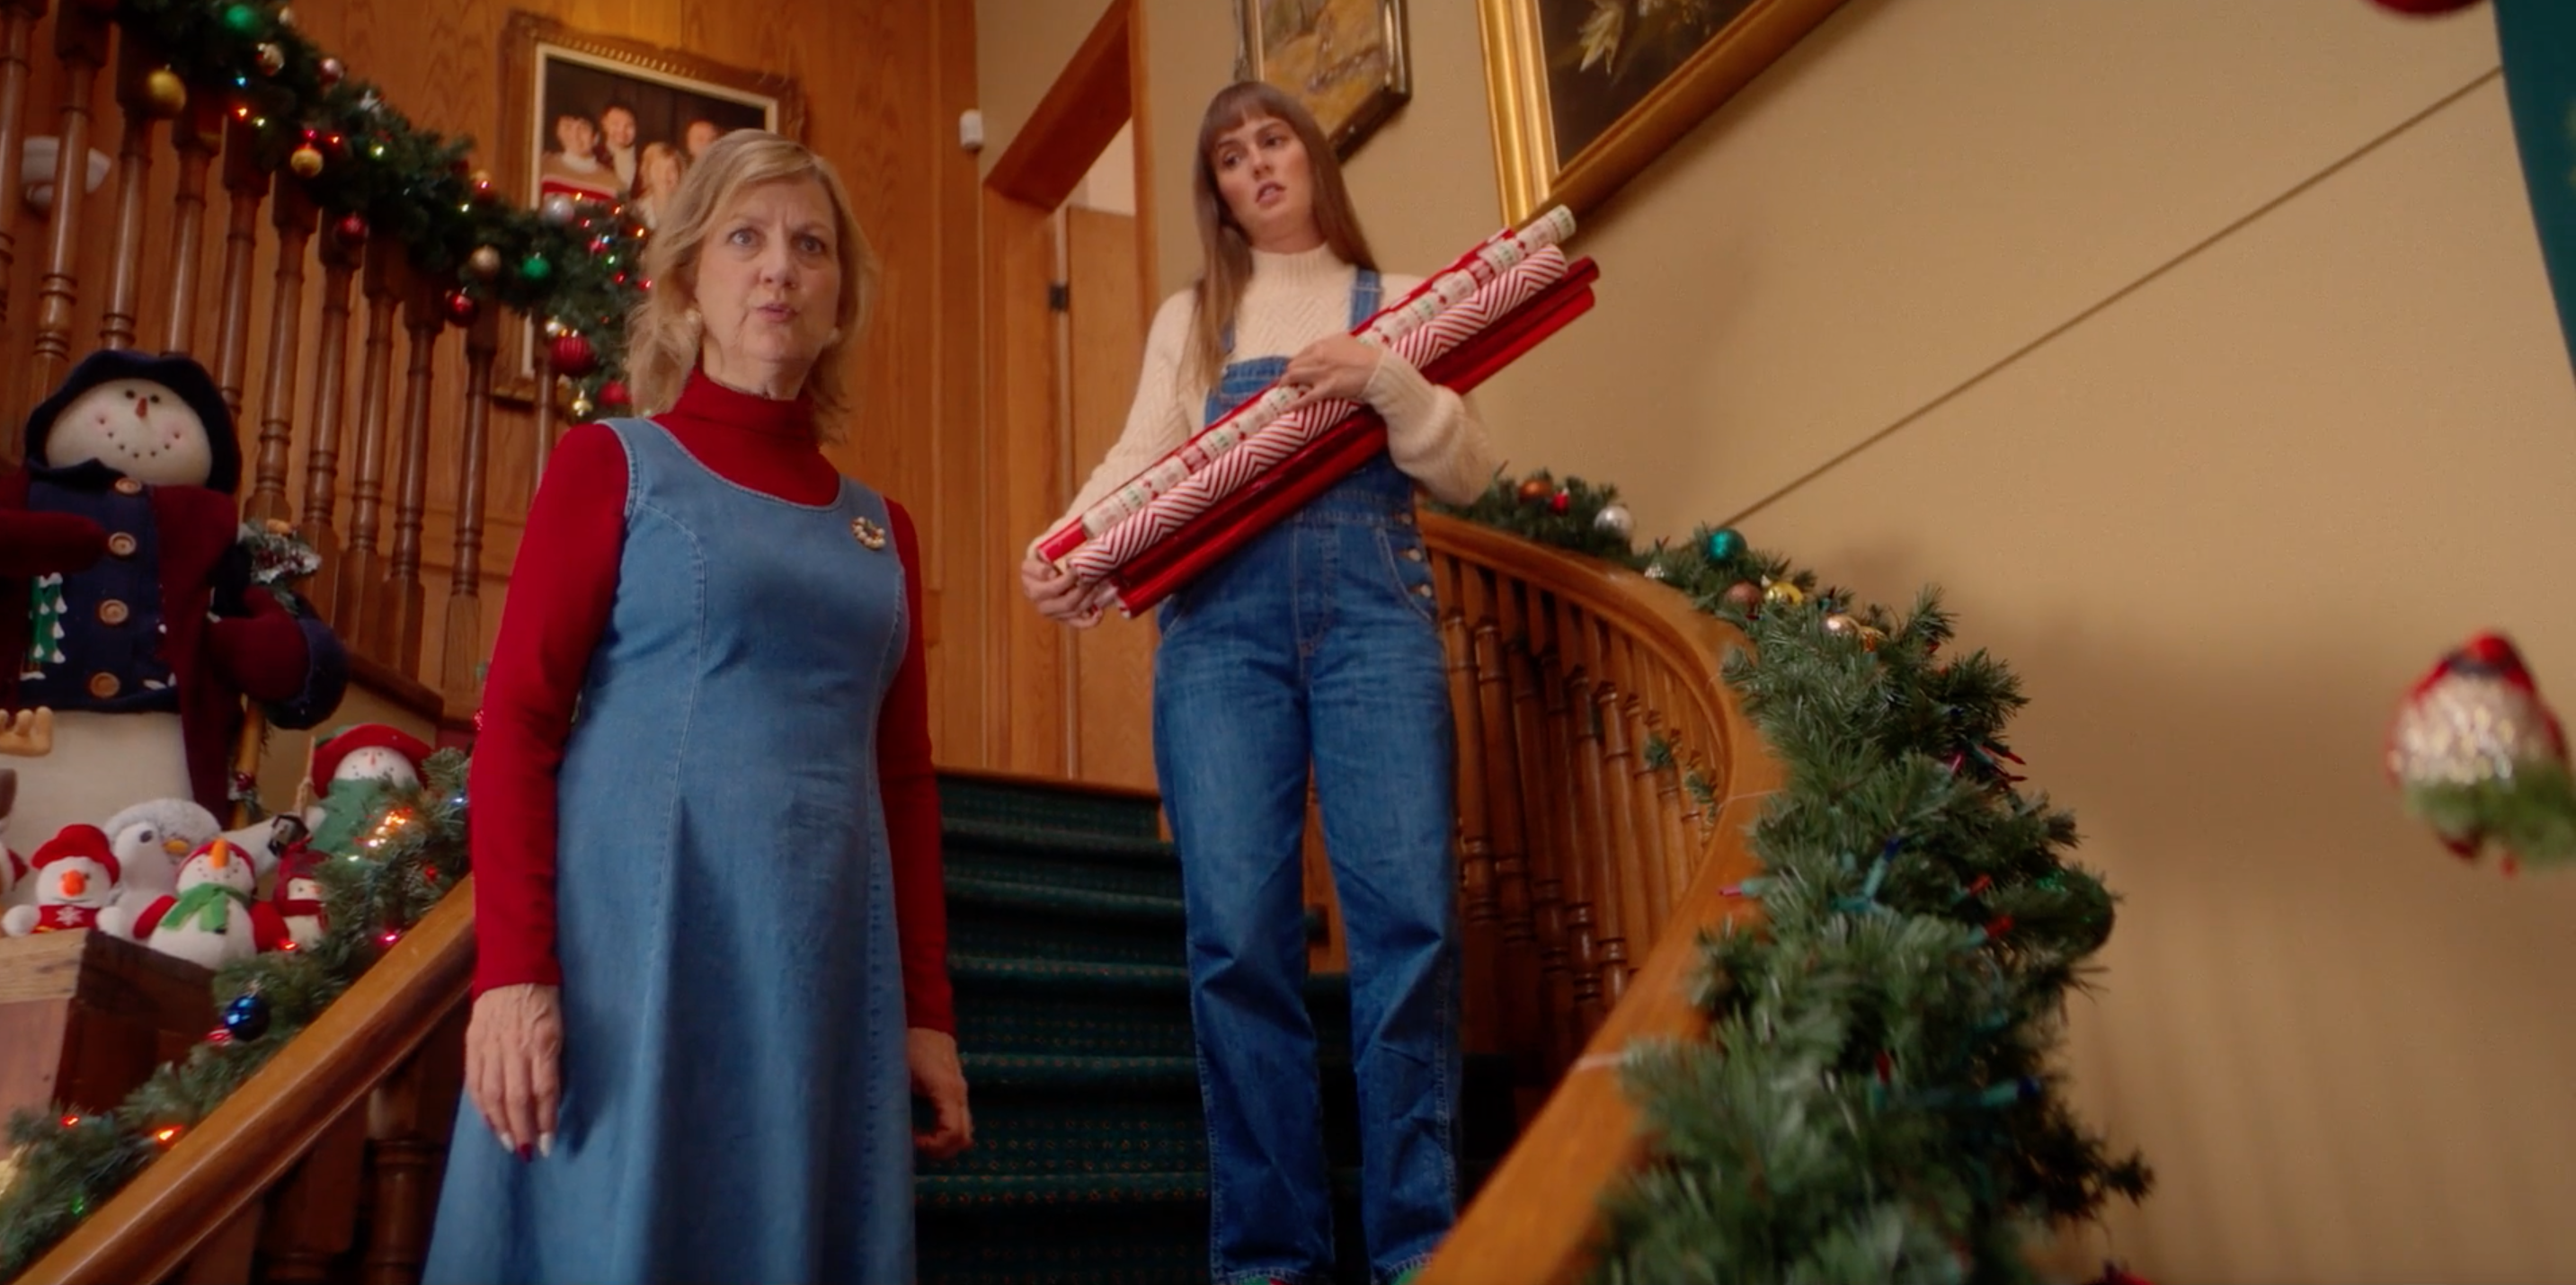 mom on the stairs defending ali who holds christmas wrapping paper. house is very decorated